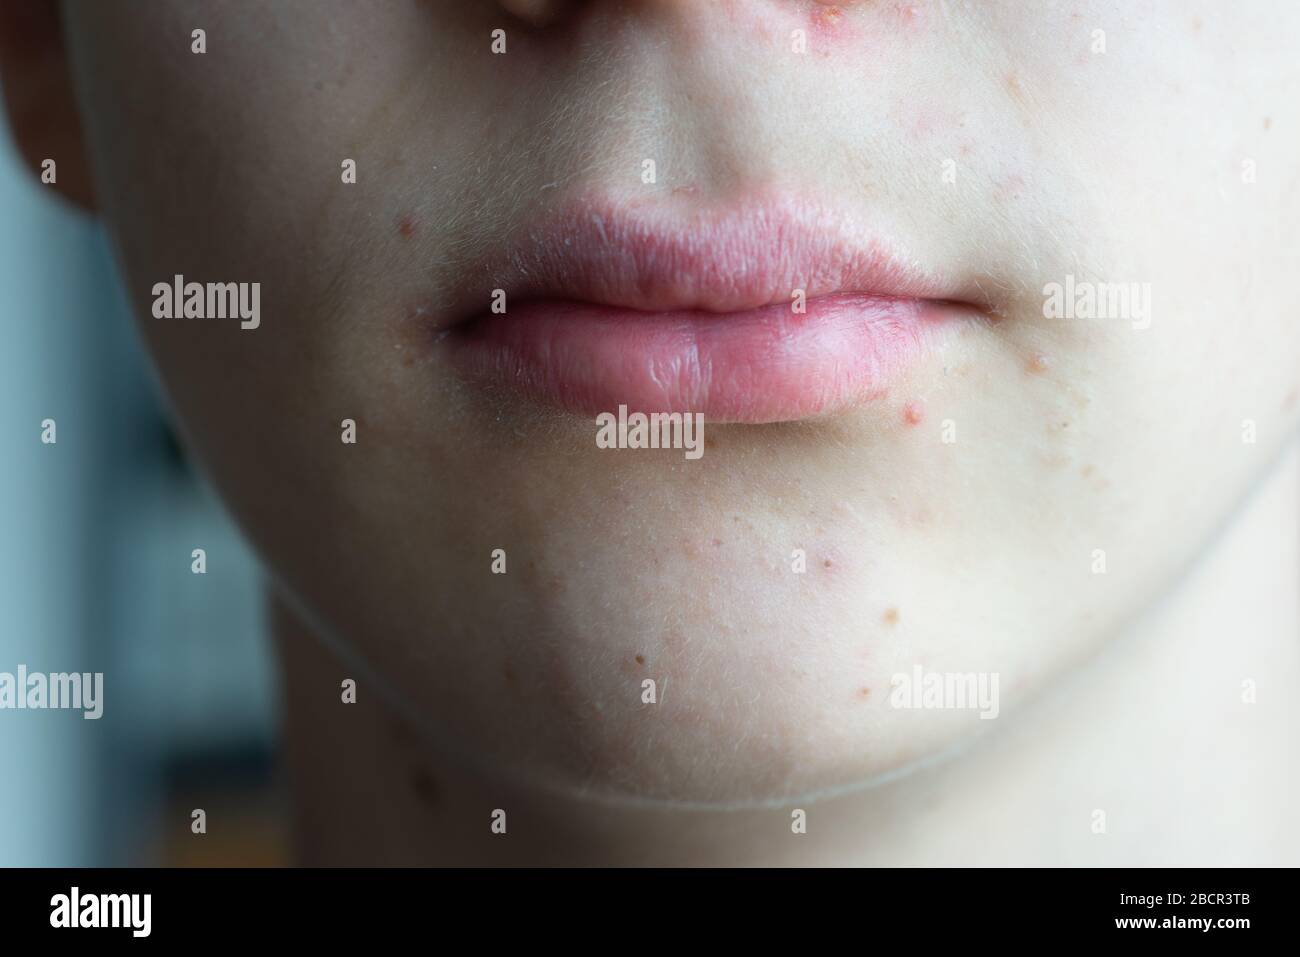 teenage boy withachné spots and dry lips.close up.skin care. Stock Photo